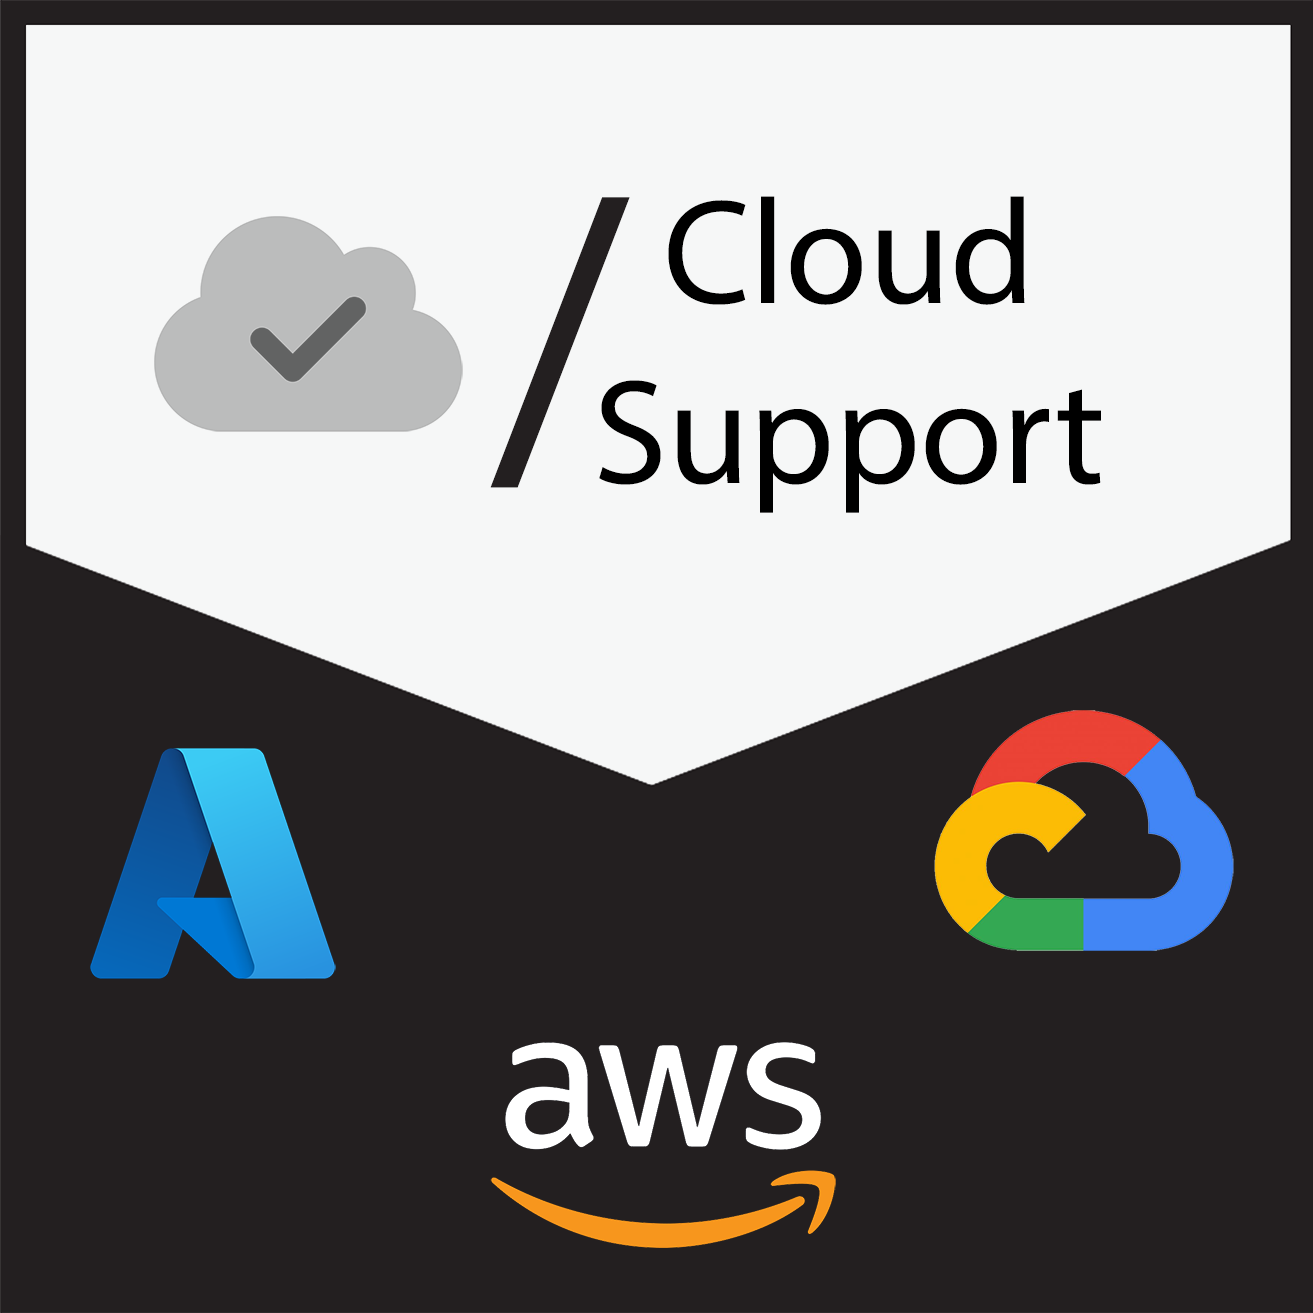 cloud-support-services@0.5x